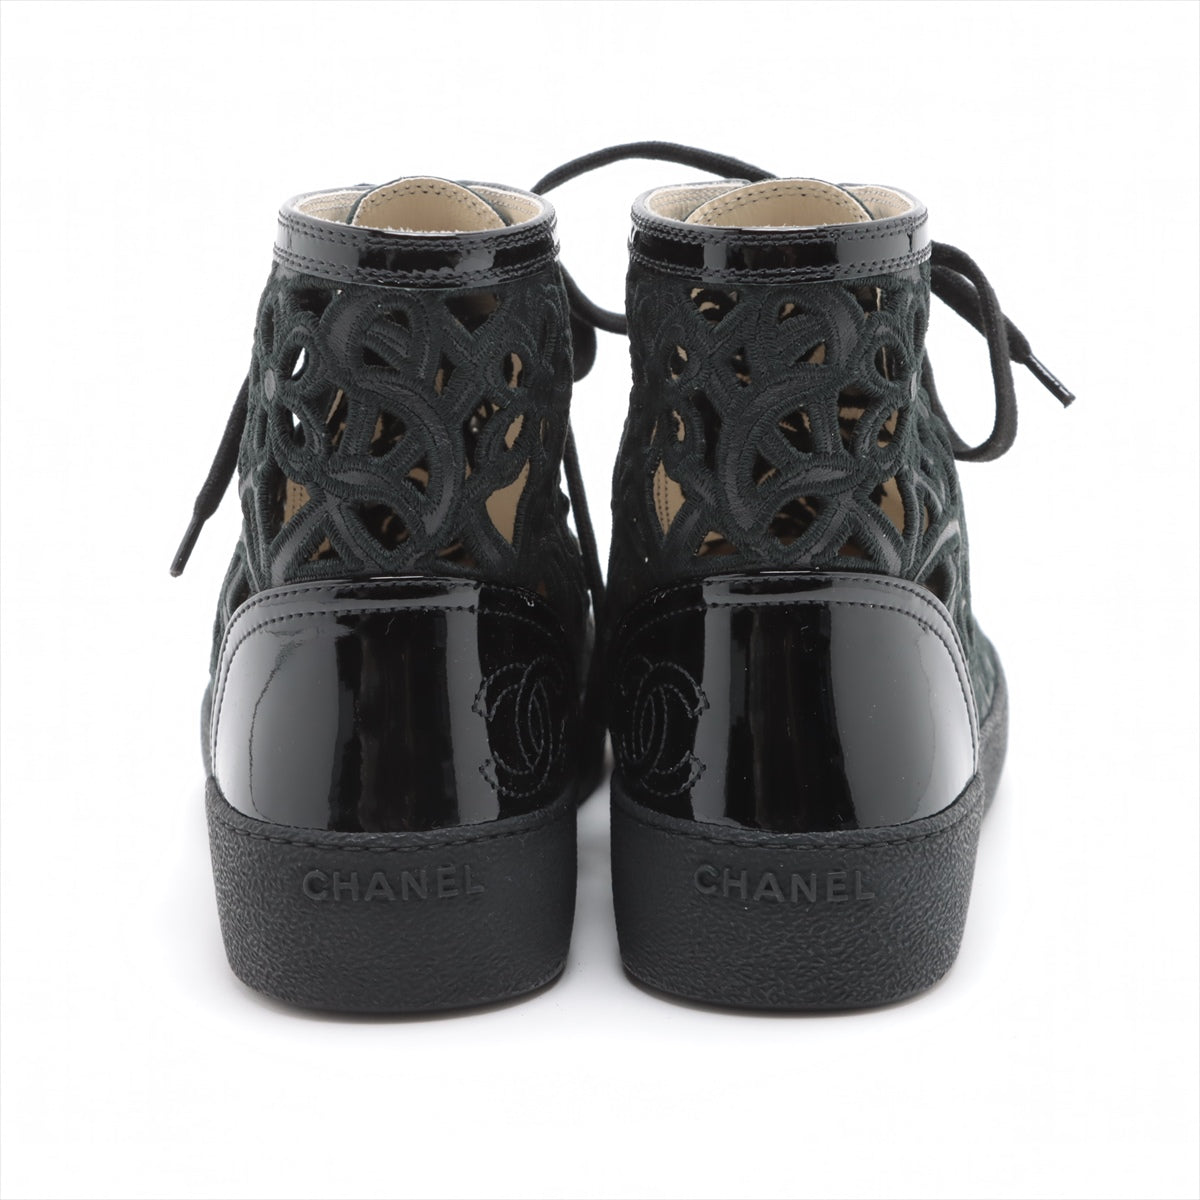 Chanel Coco Mark Leather x fabric High-top Sneakers 38 Ladies' Black floral lace Box Bag Included